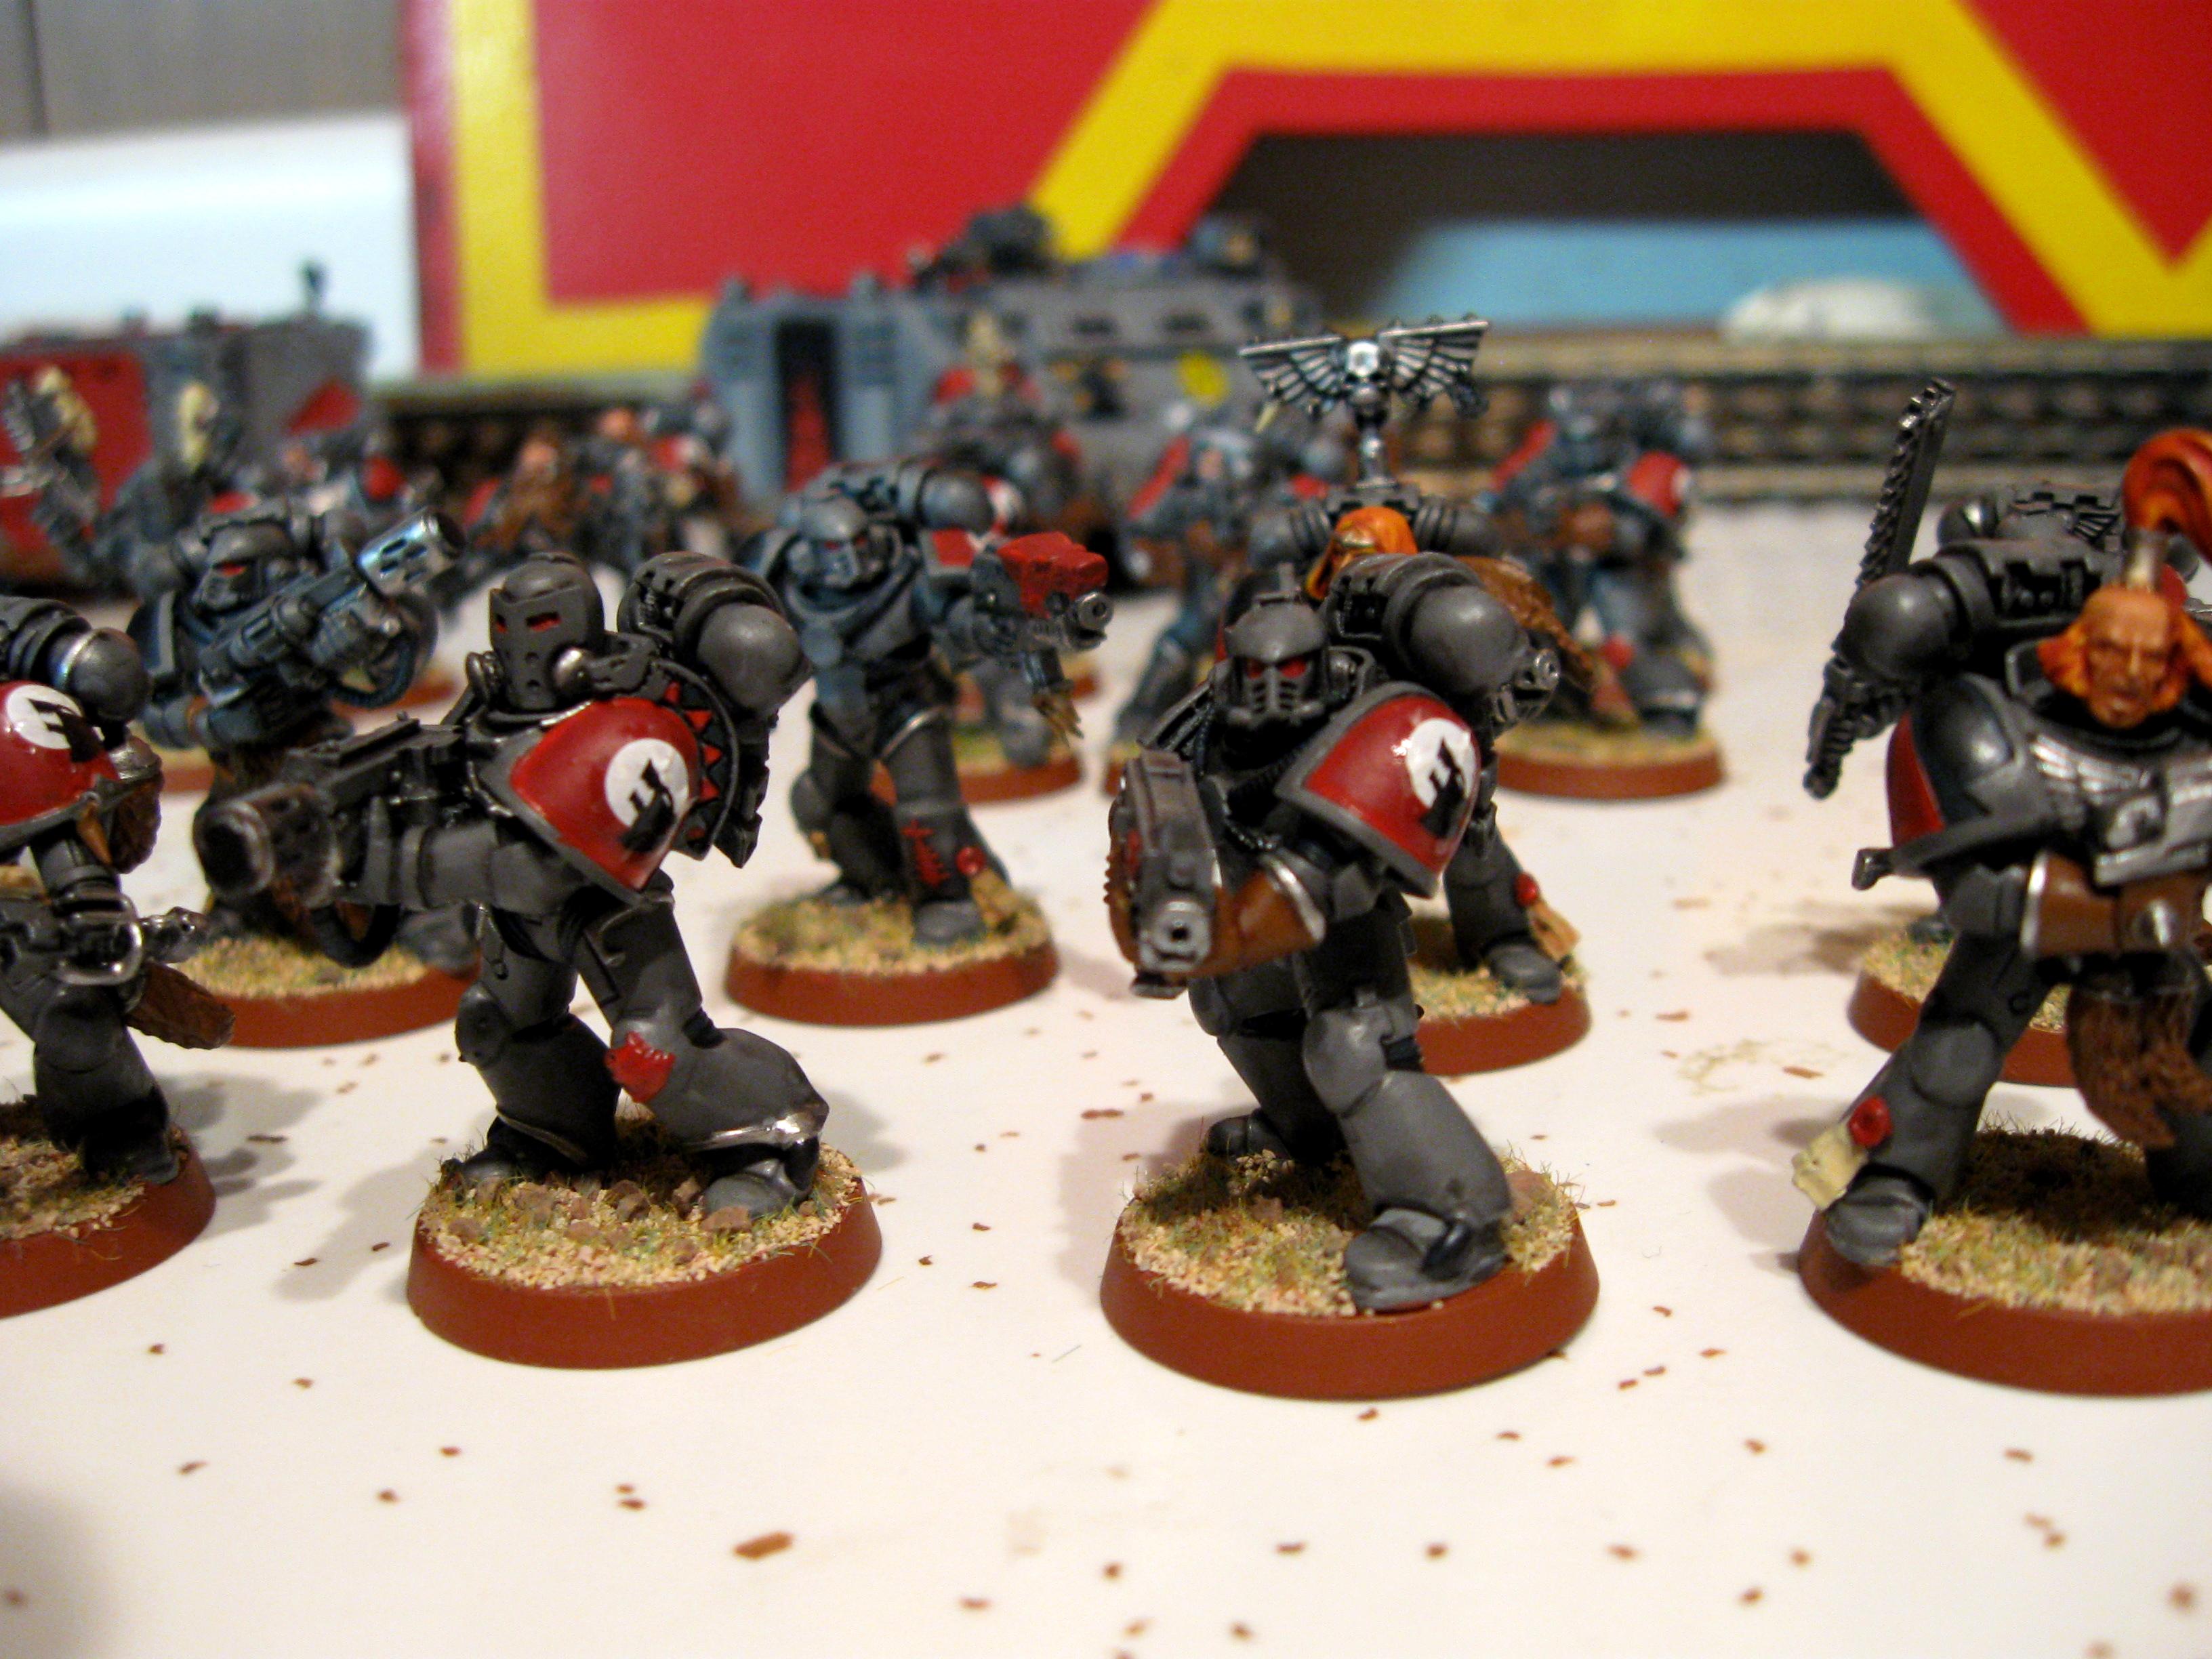 Pre Heresy, Space Marines, Space Wolves